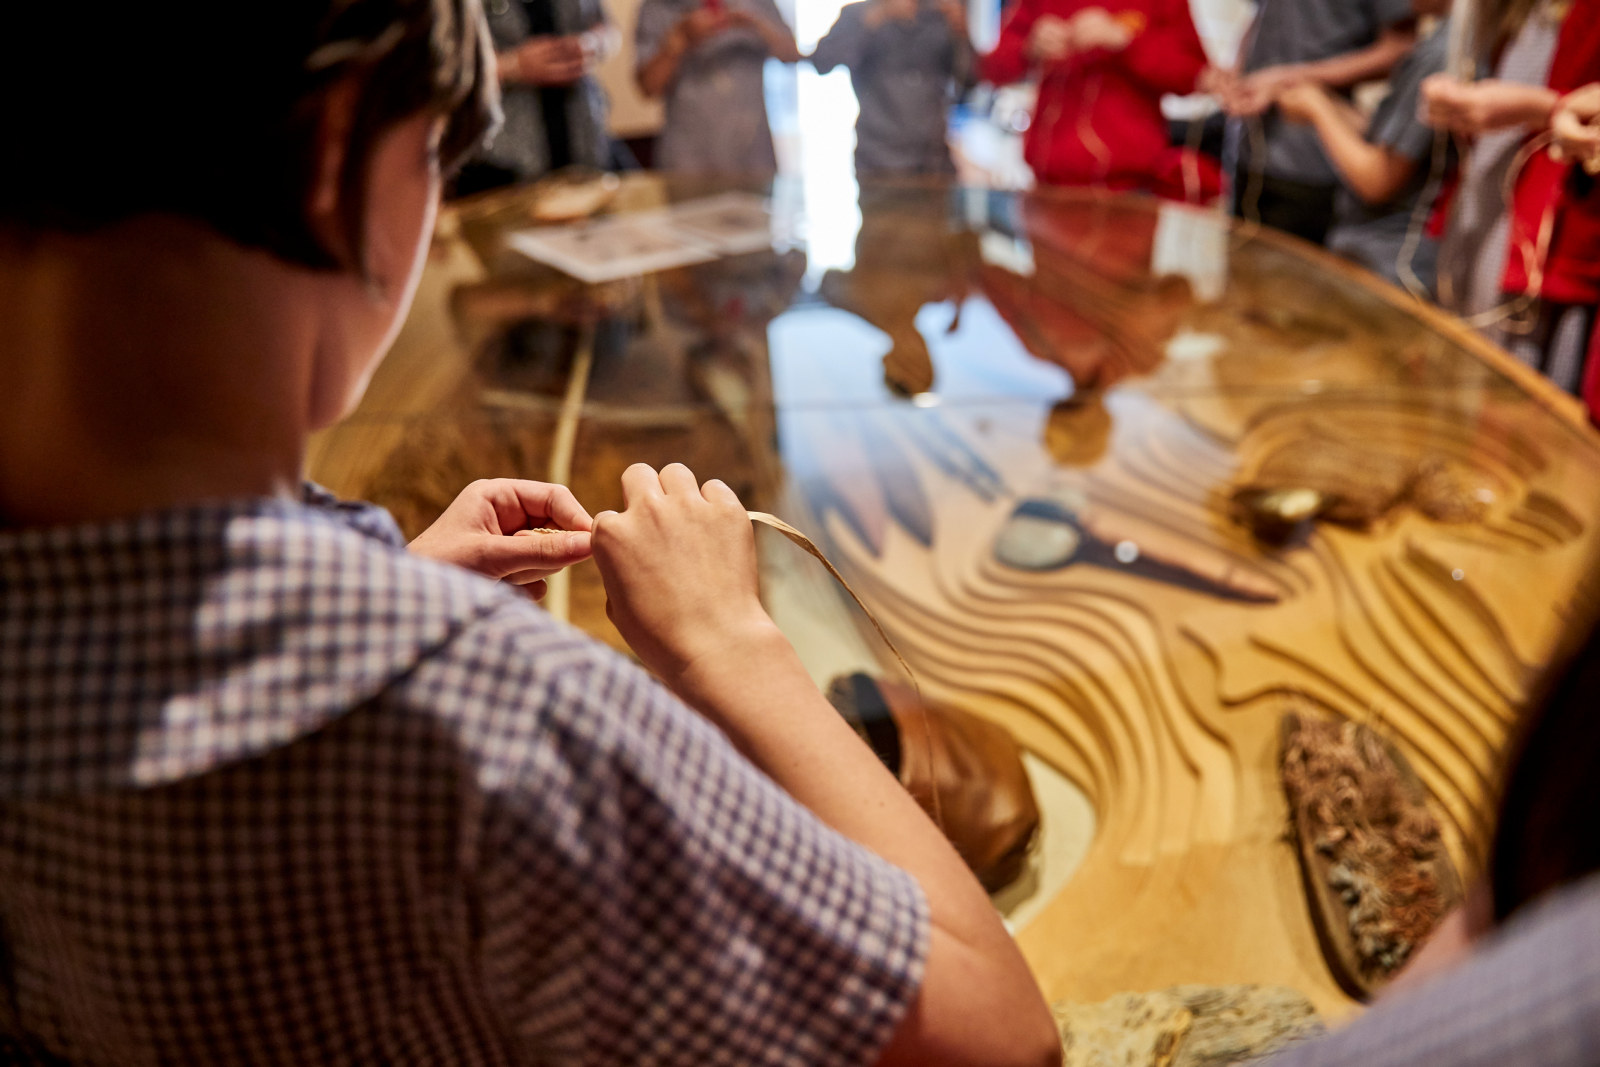 Students learning an Aboriginal stringing technique in the Gadigal Place Gallery of the Museum of Sydney as part of the Garuwanga Gurad (Stories that belong to Country) program